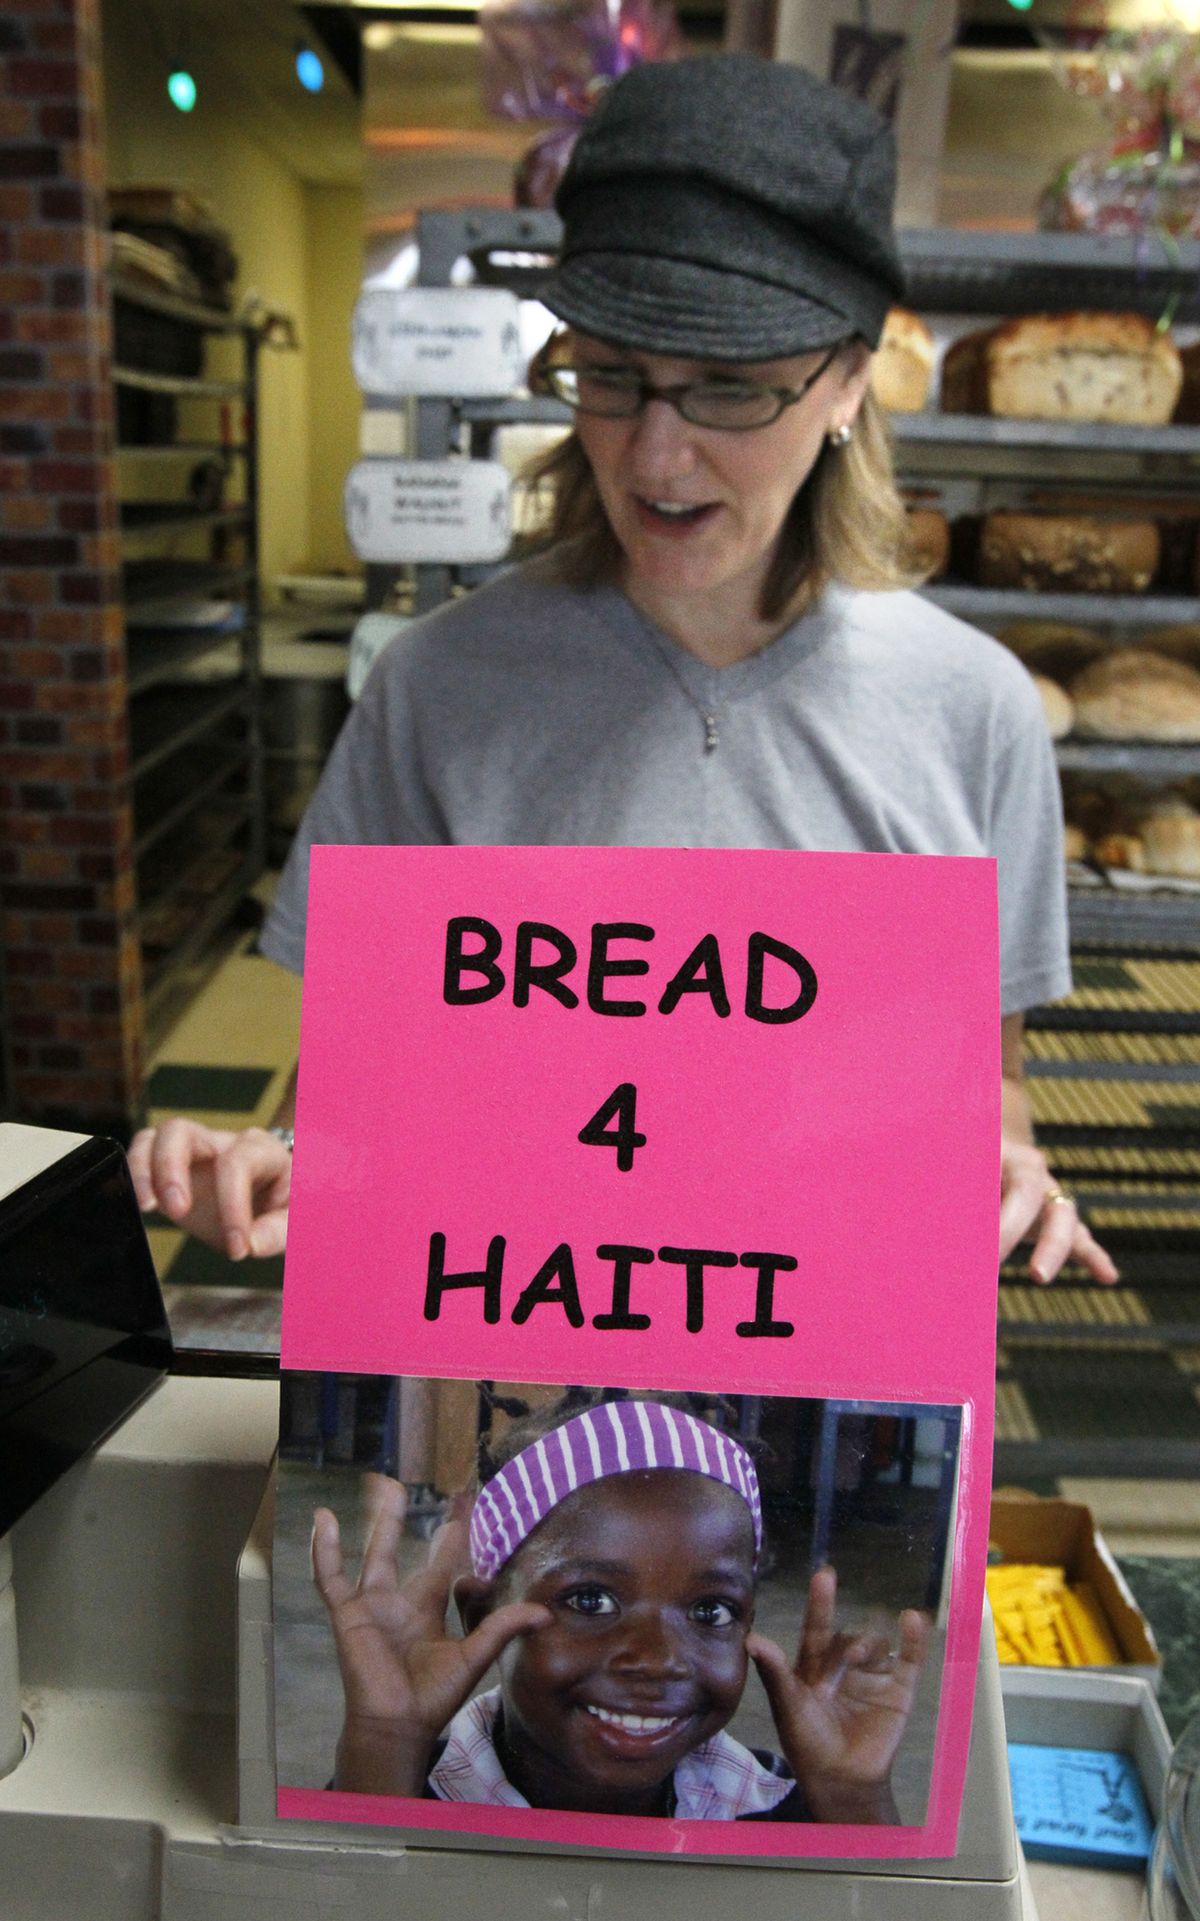 Shelli Volkmer rings up an order with a Bread 4 Haiti donation jar in front of the cash register last month in Stow, Ohio.